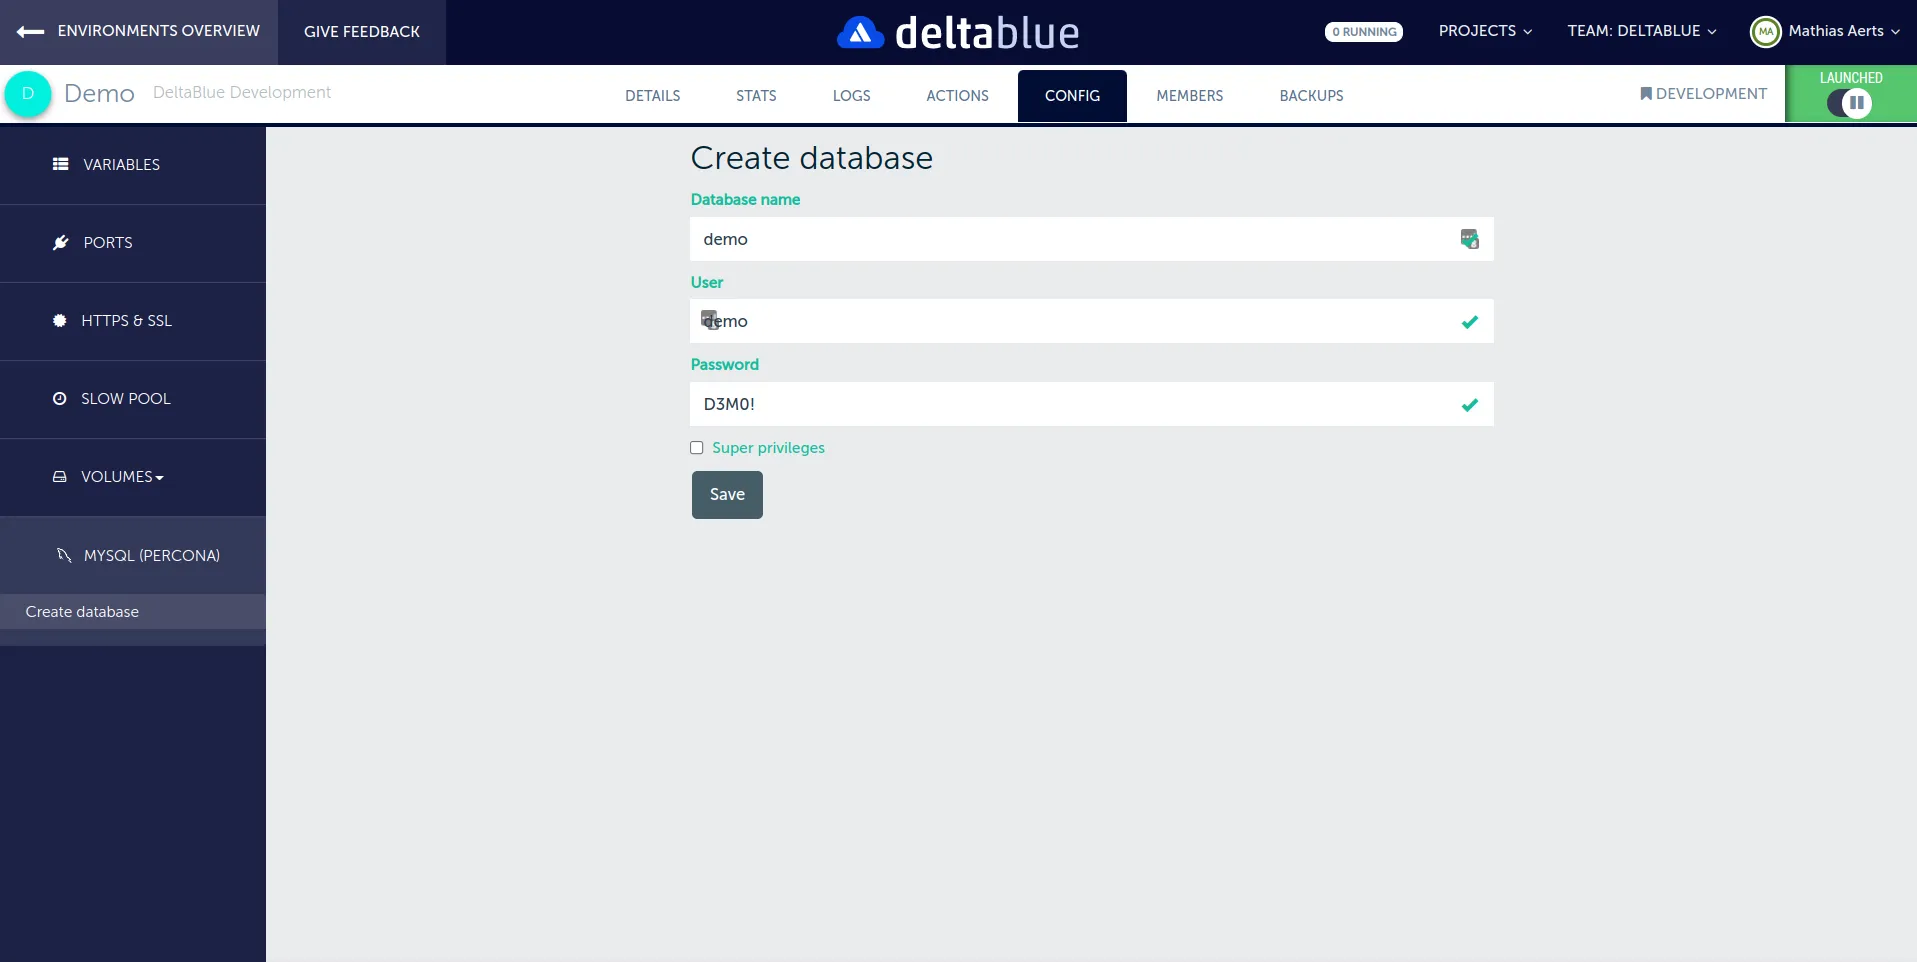 Create database and user